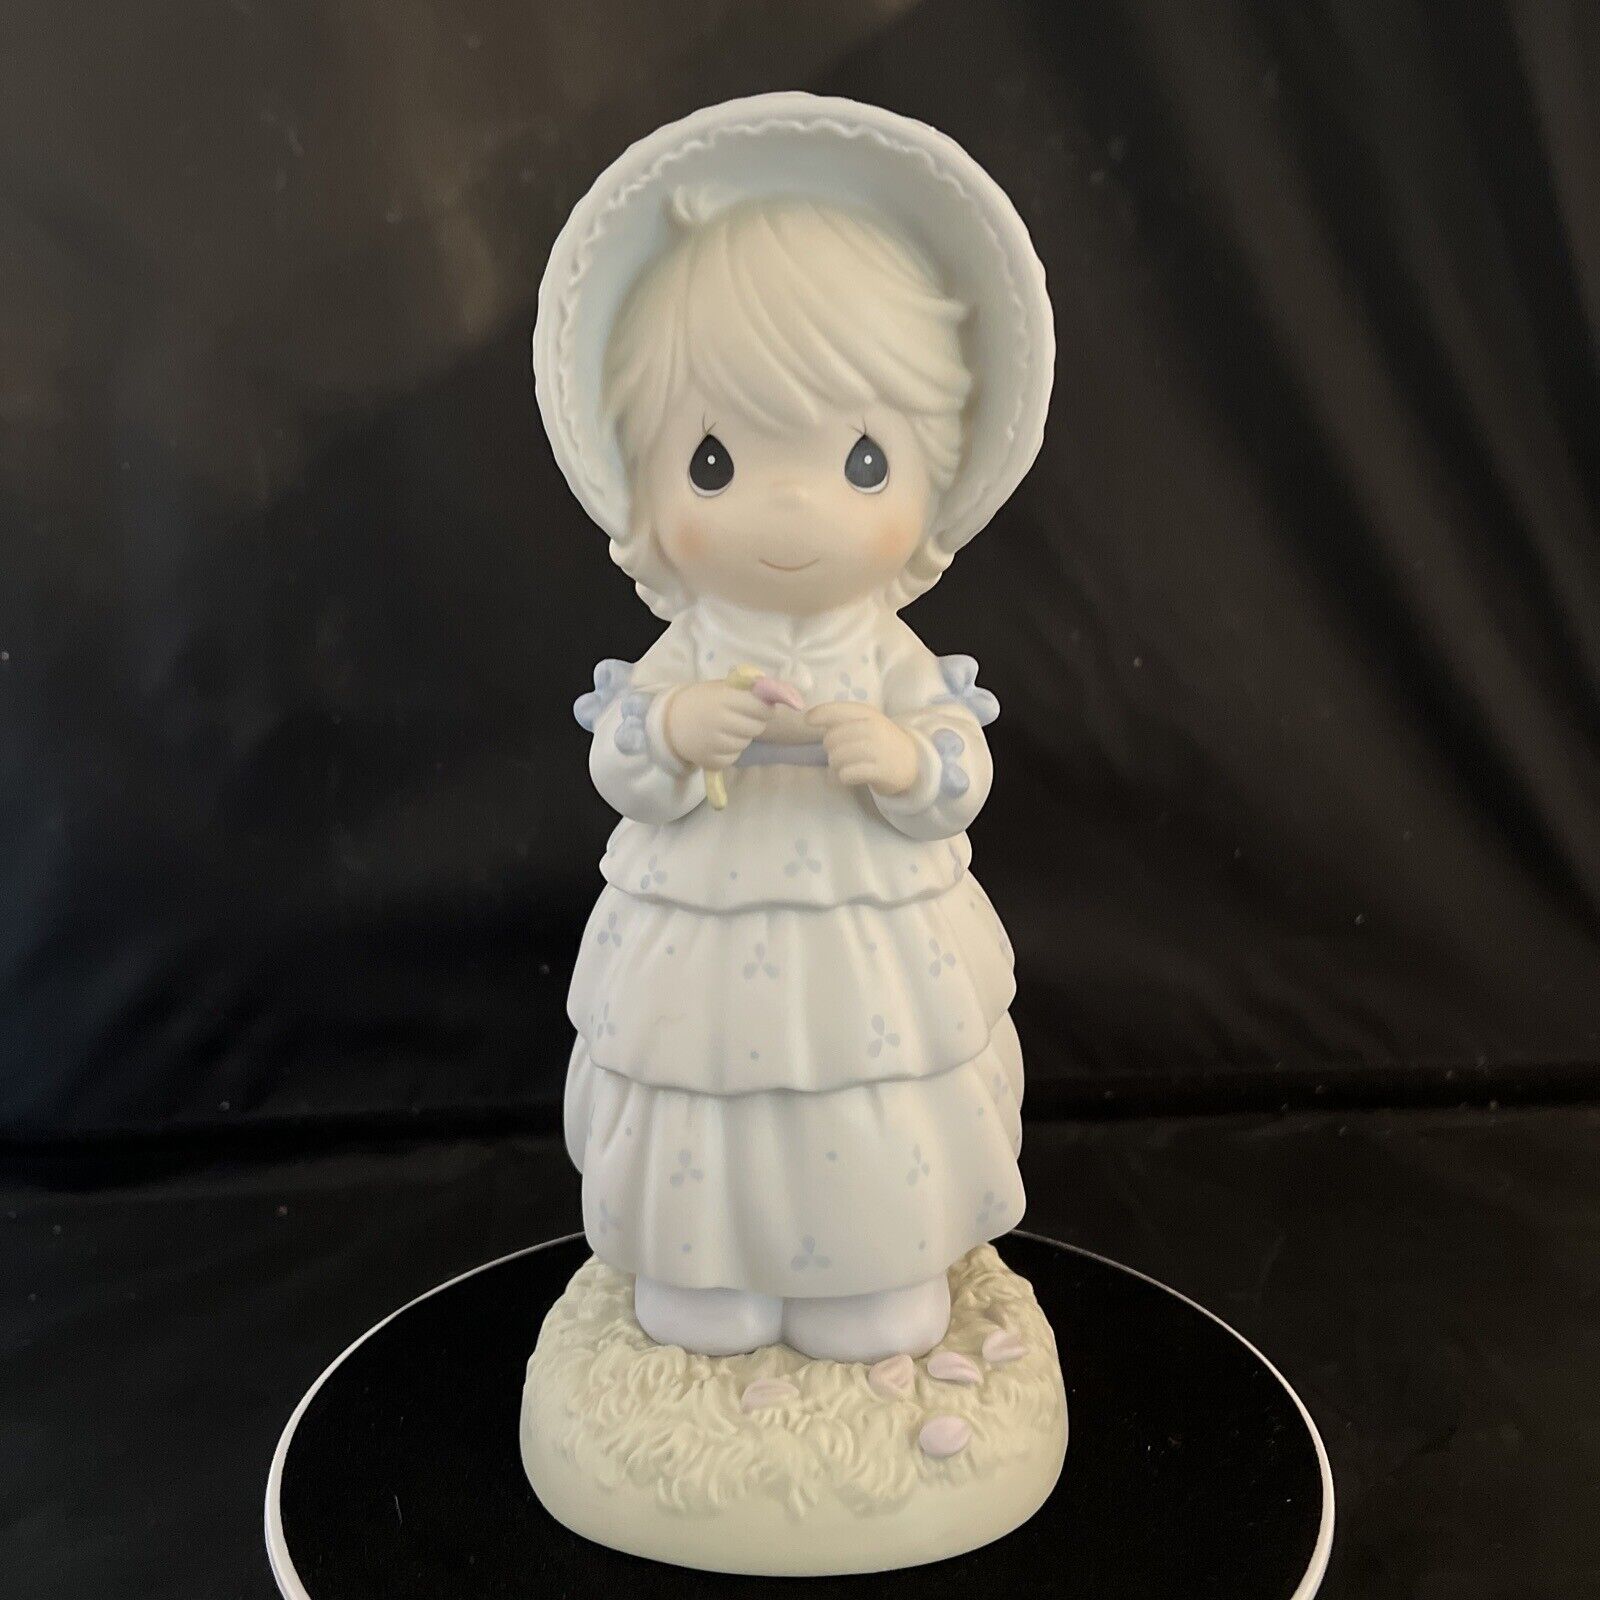 Precious Moments He Loves Me 9” Easter Seals Limited Edition Figurine